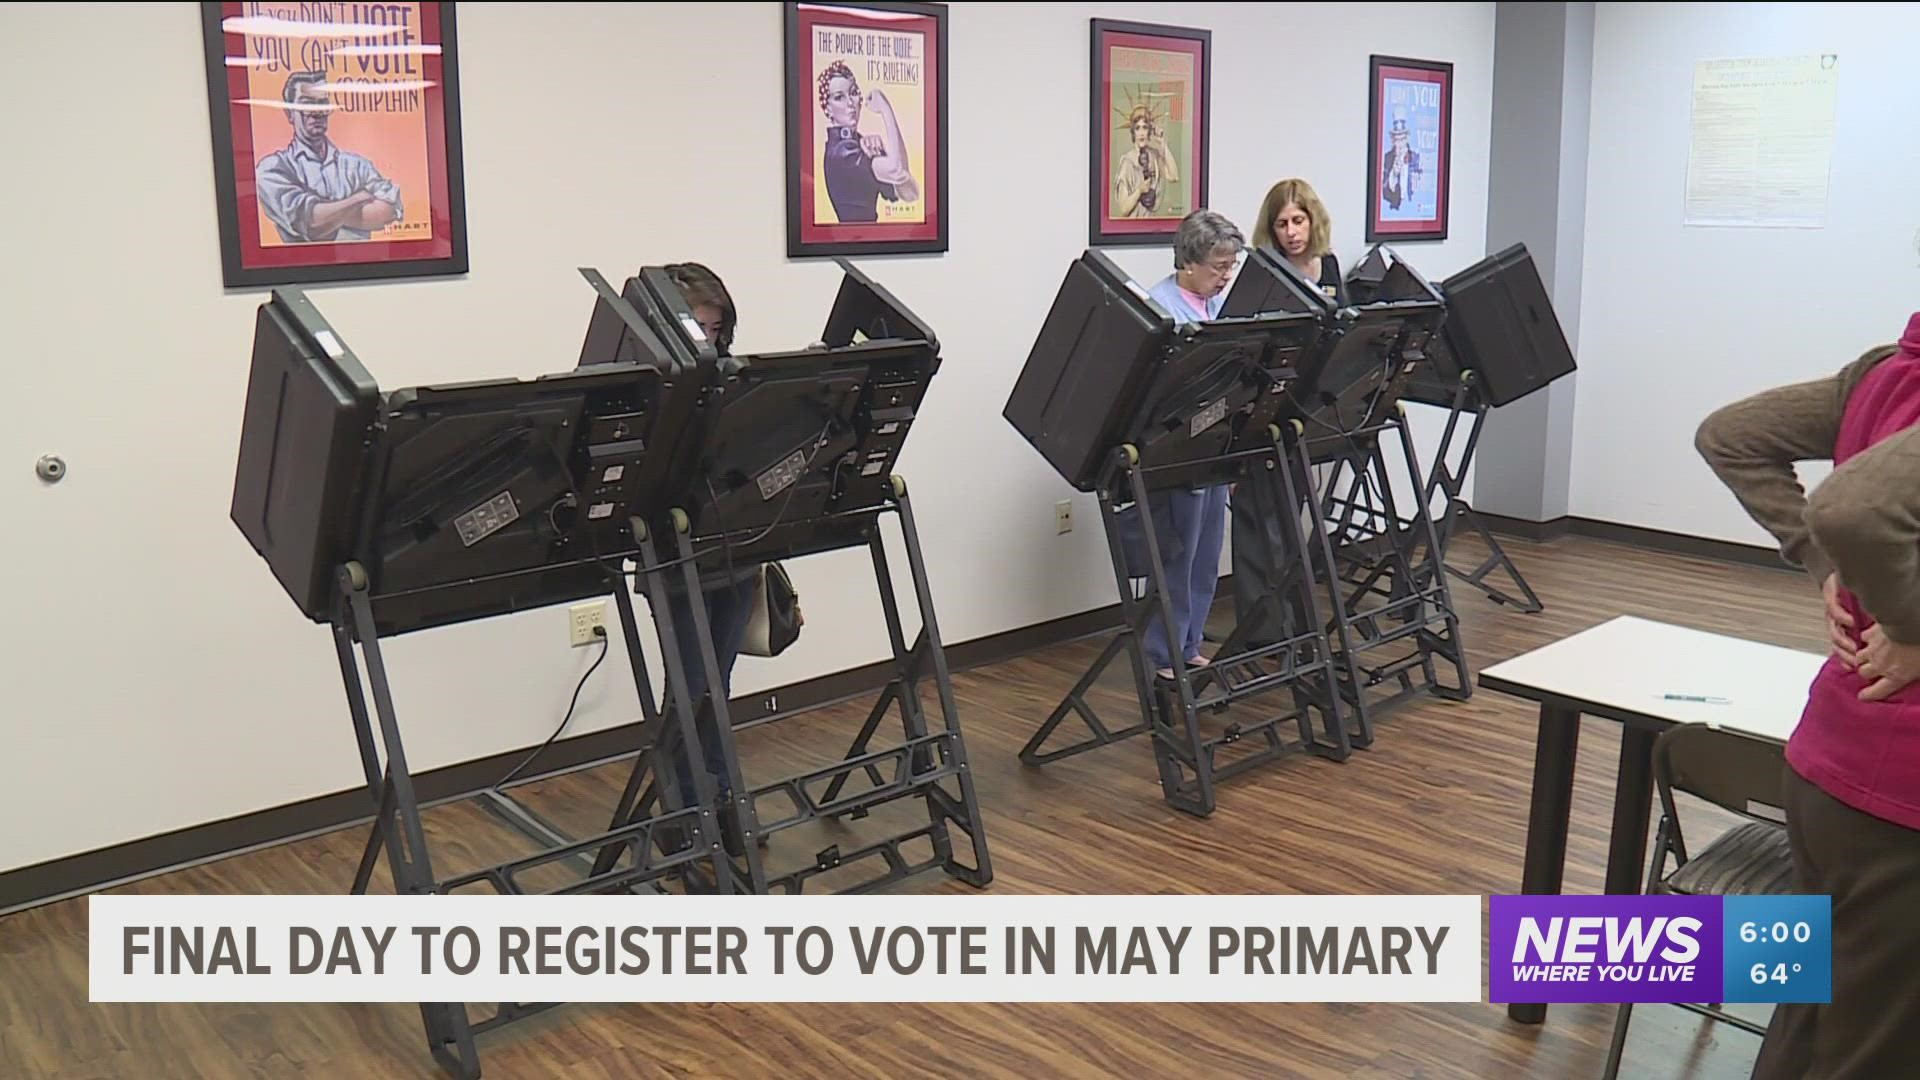 Looking ahead to the 2022 Arkansas Primary, new laws could impact voters.